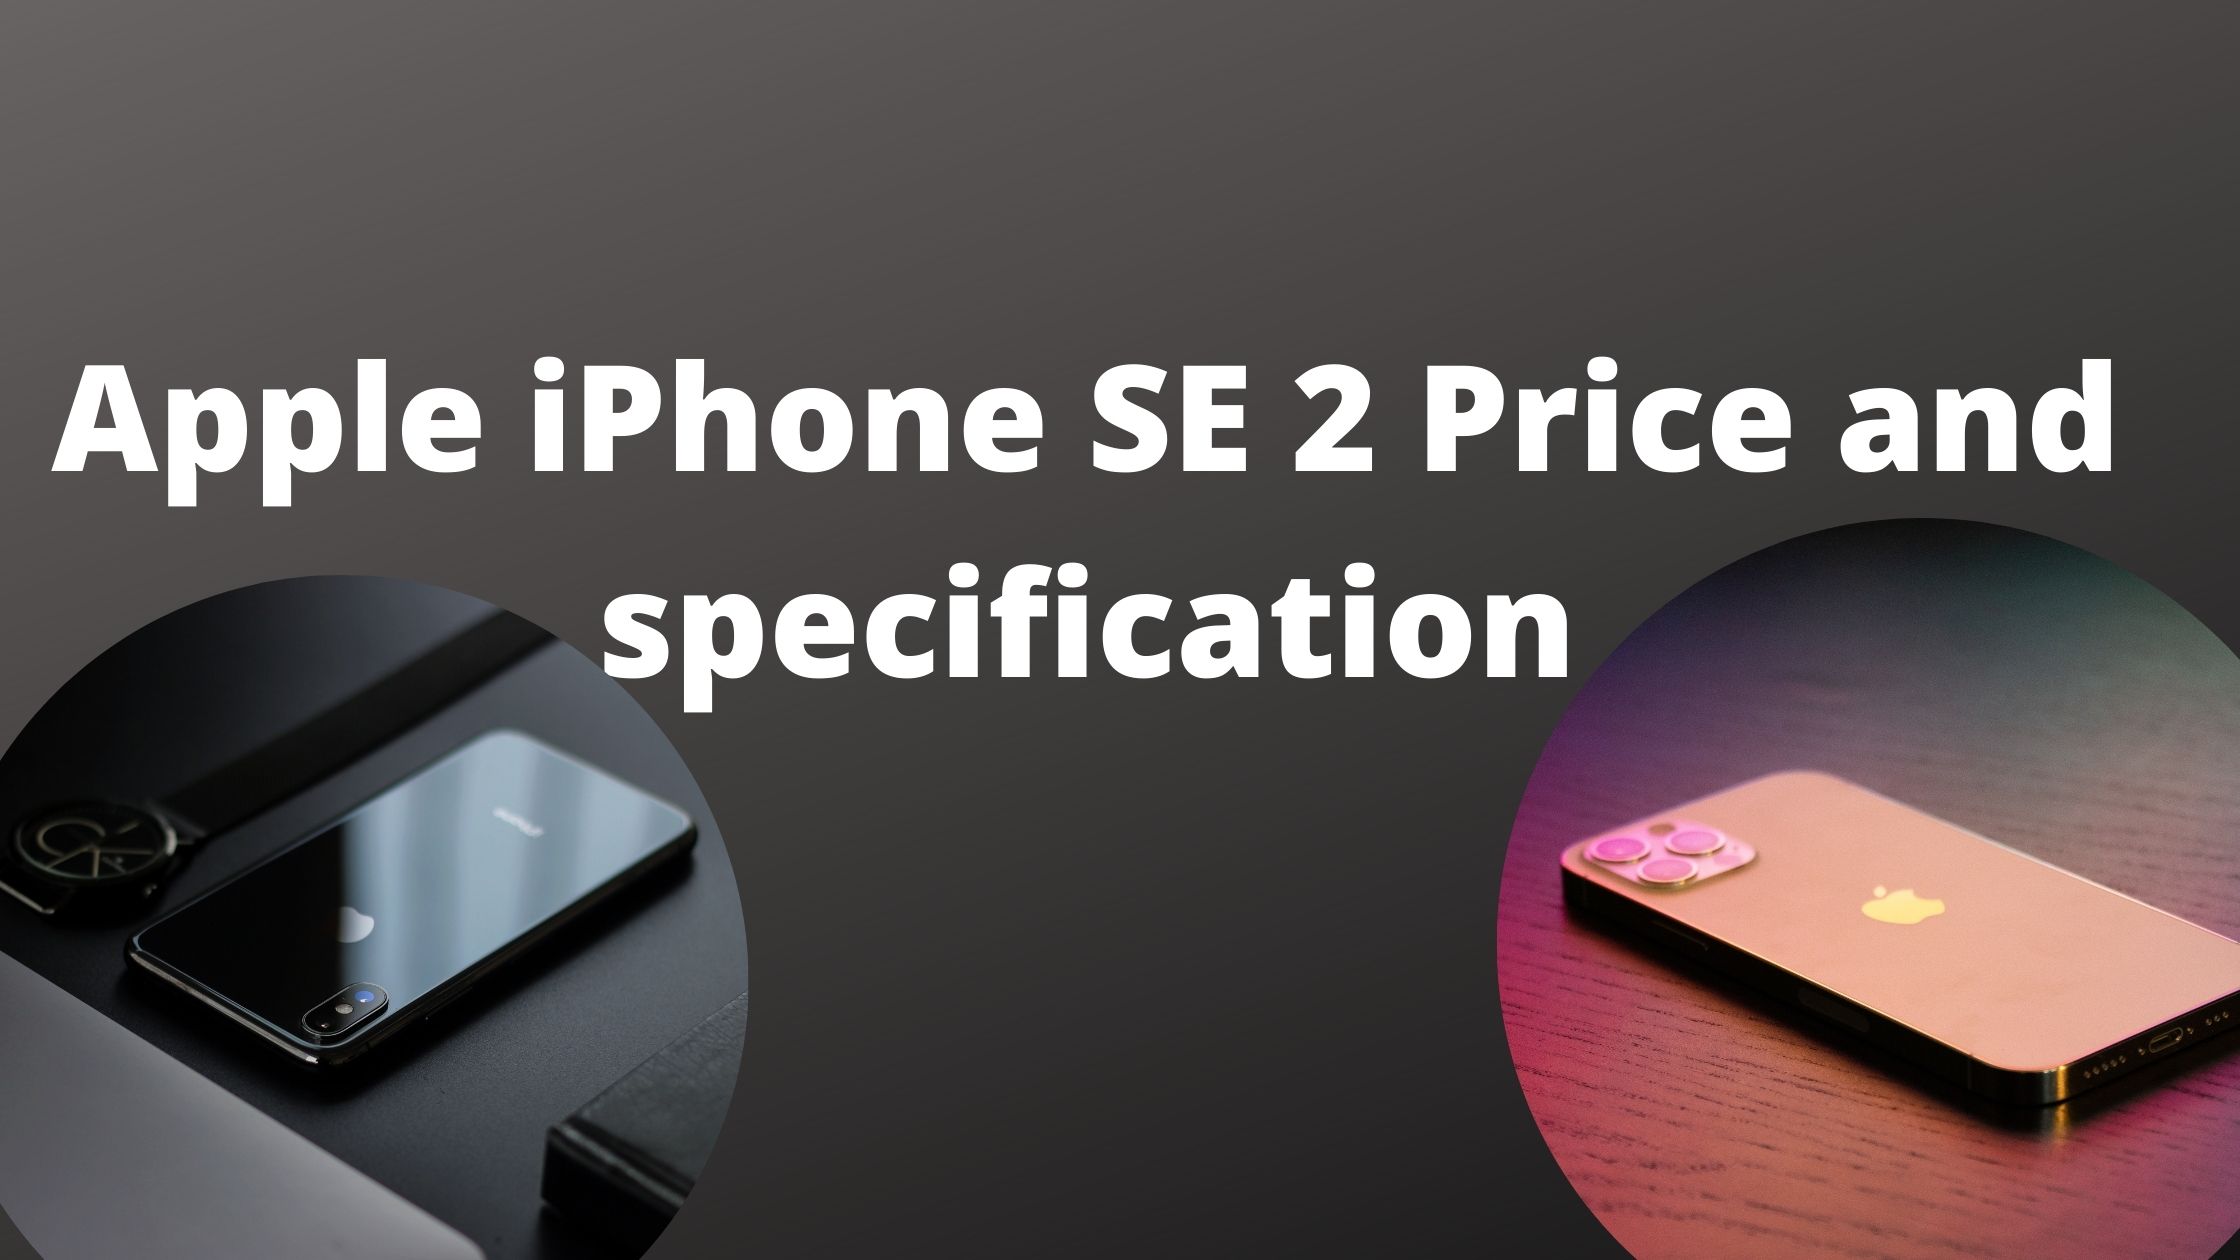  Apple iPhone SE 2 – Price and Specification